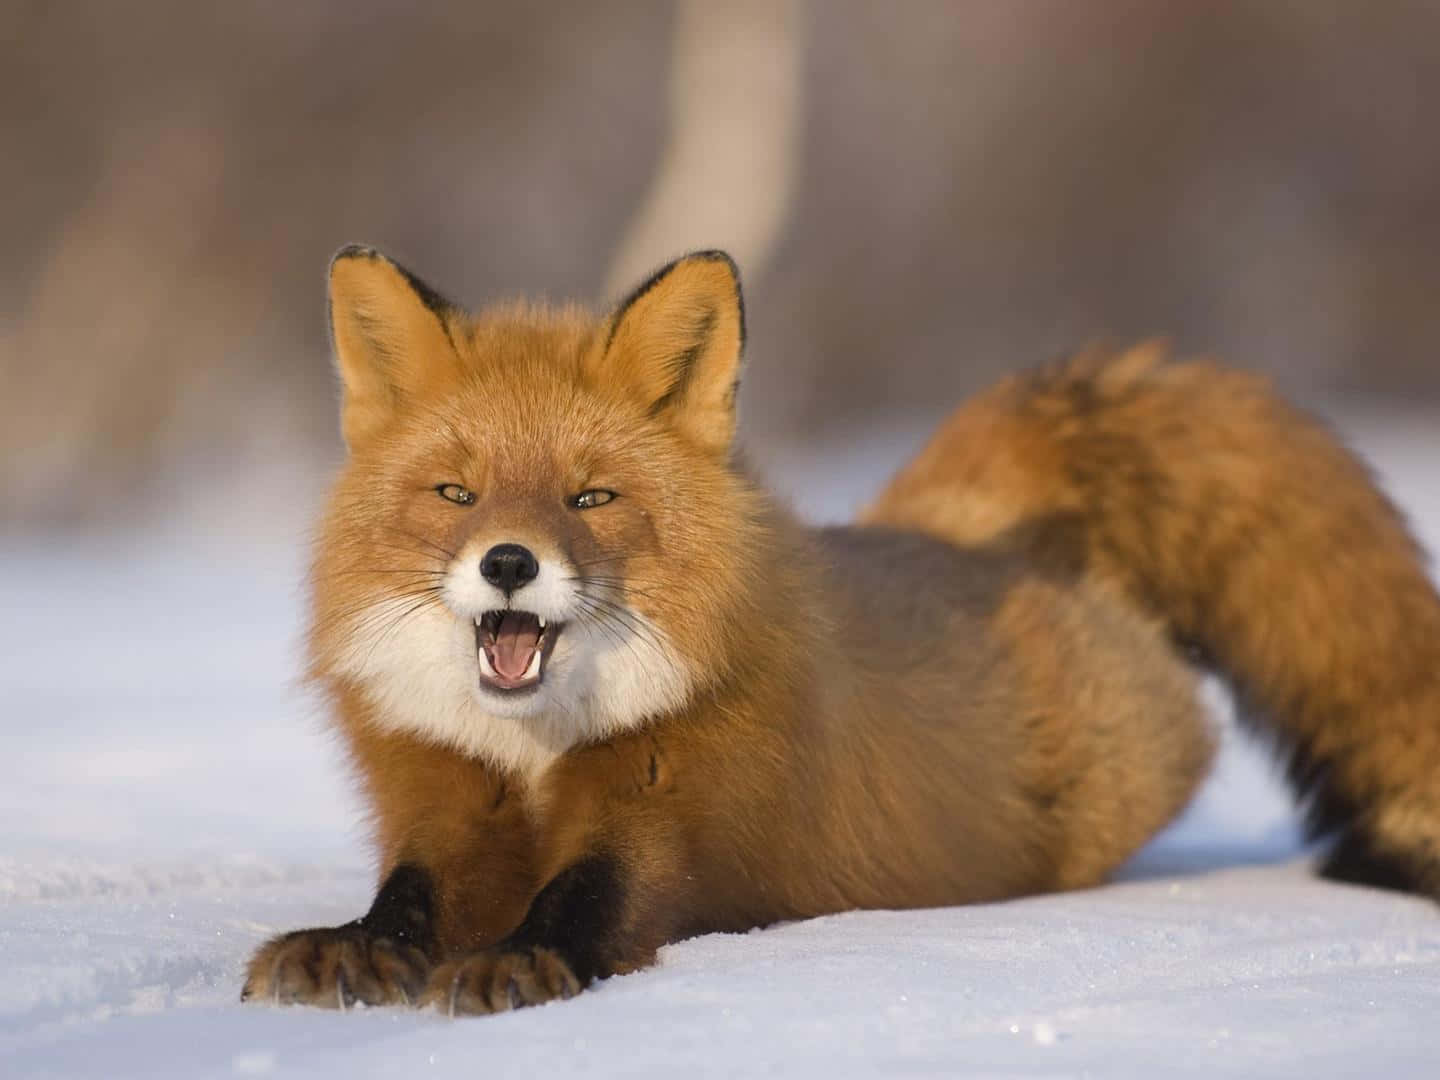 This beautiful red fox soaks up the warmth of the sun.